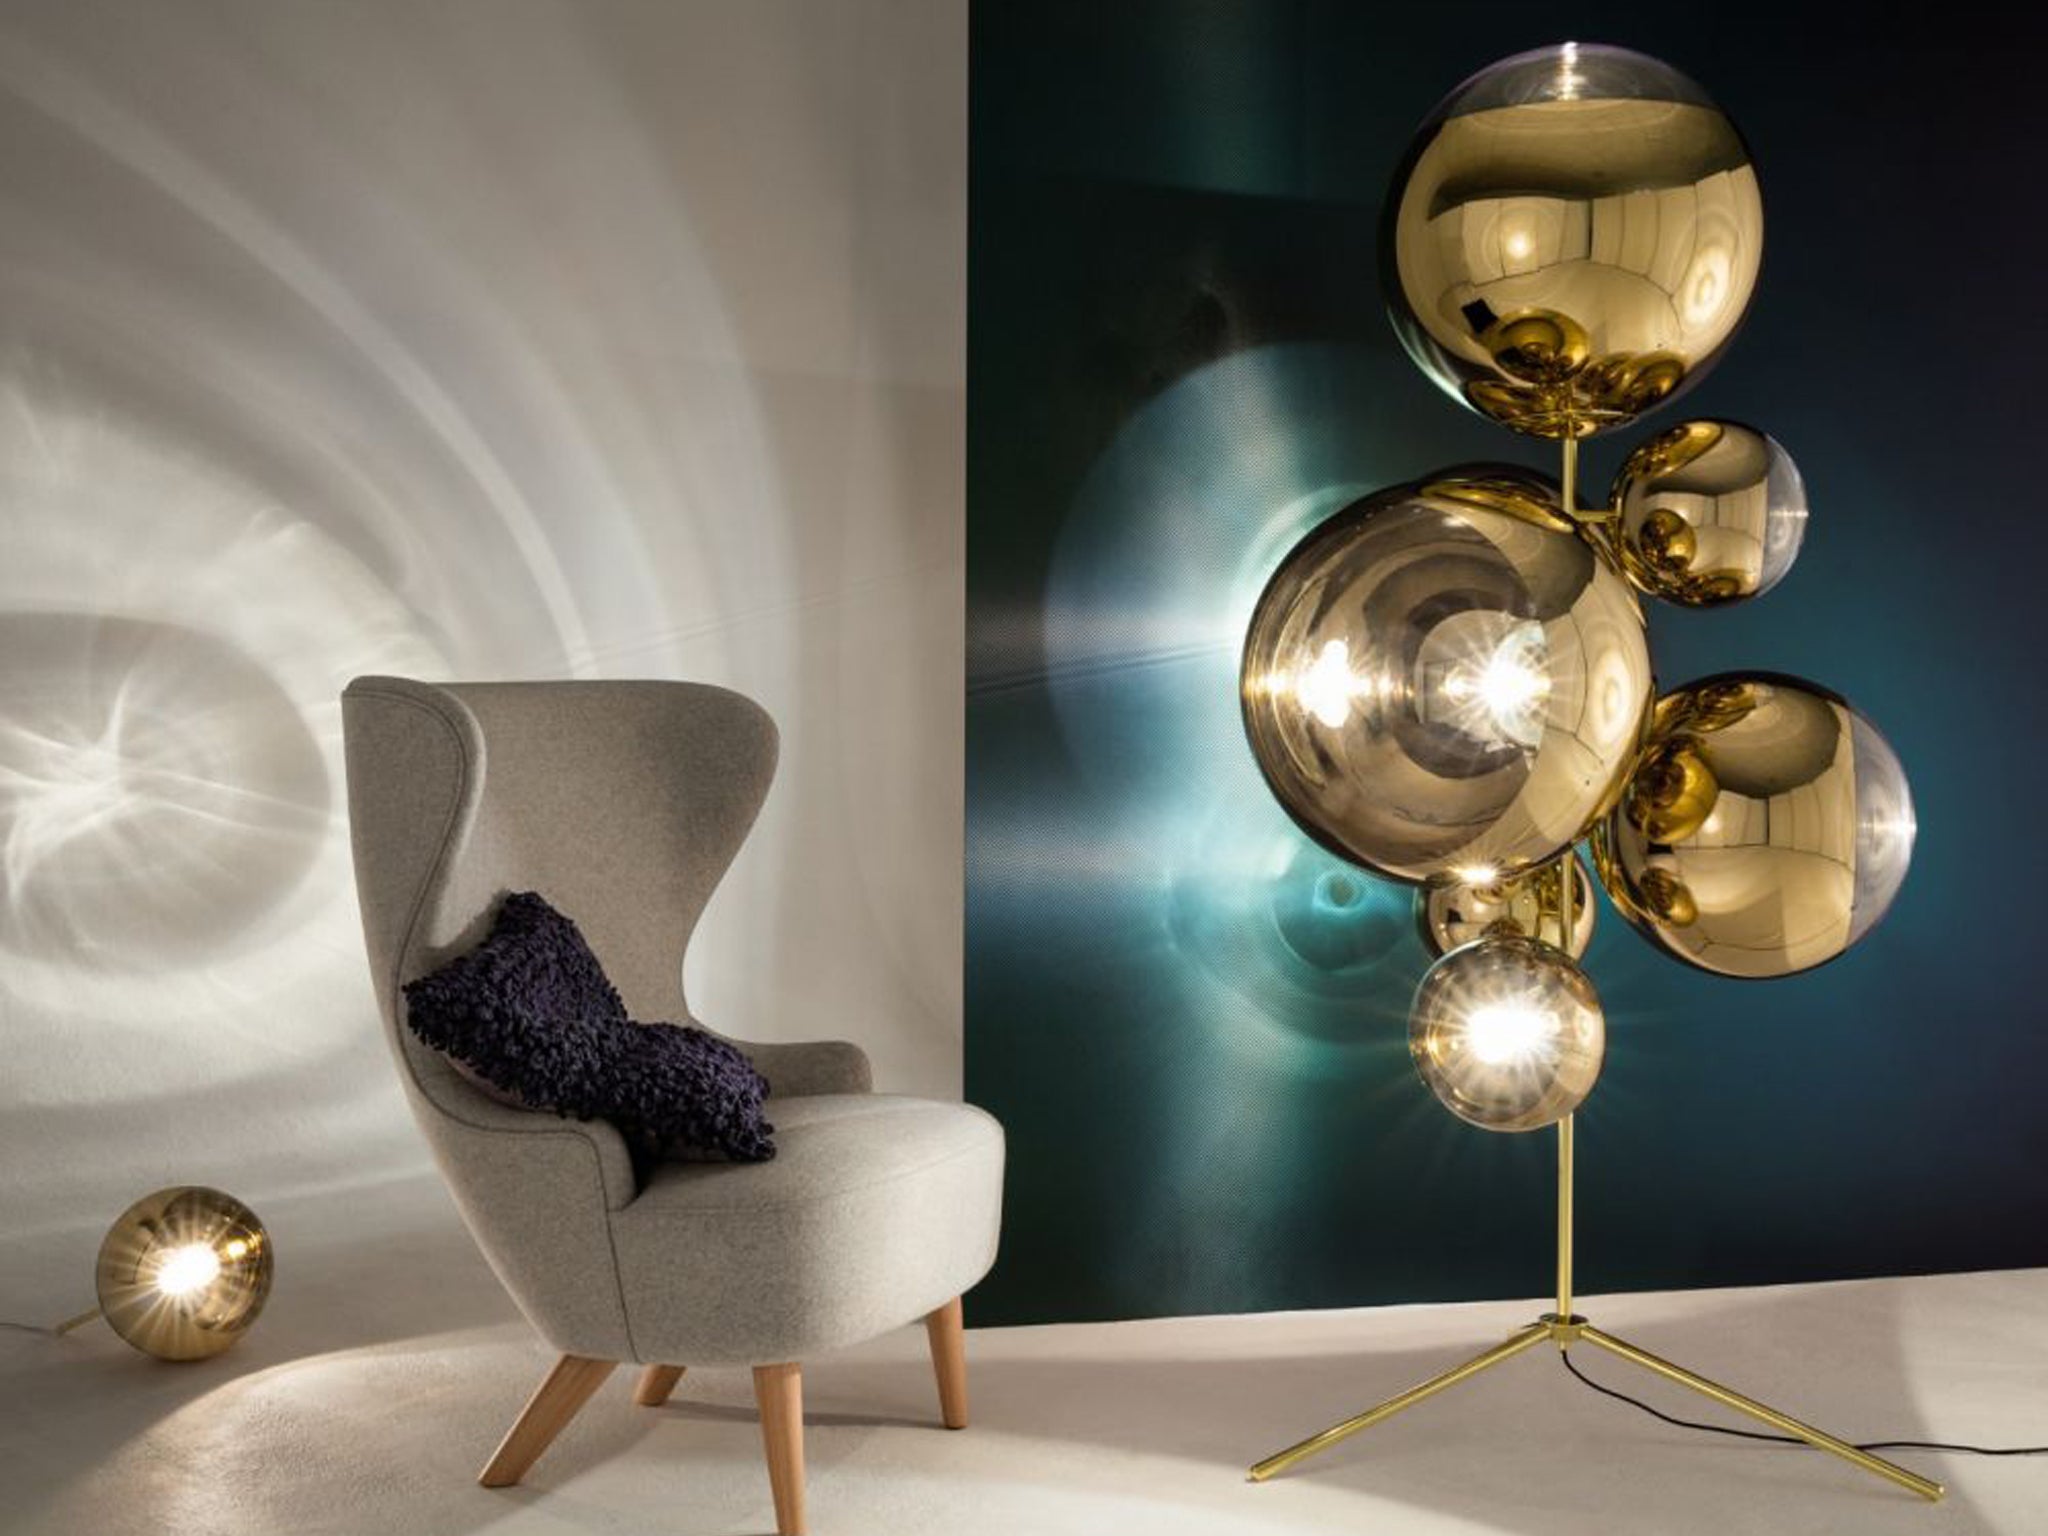 The Mirror Ball Stand Chandelier demands attention in any interior scheme, and is just as eyecatching when switched off